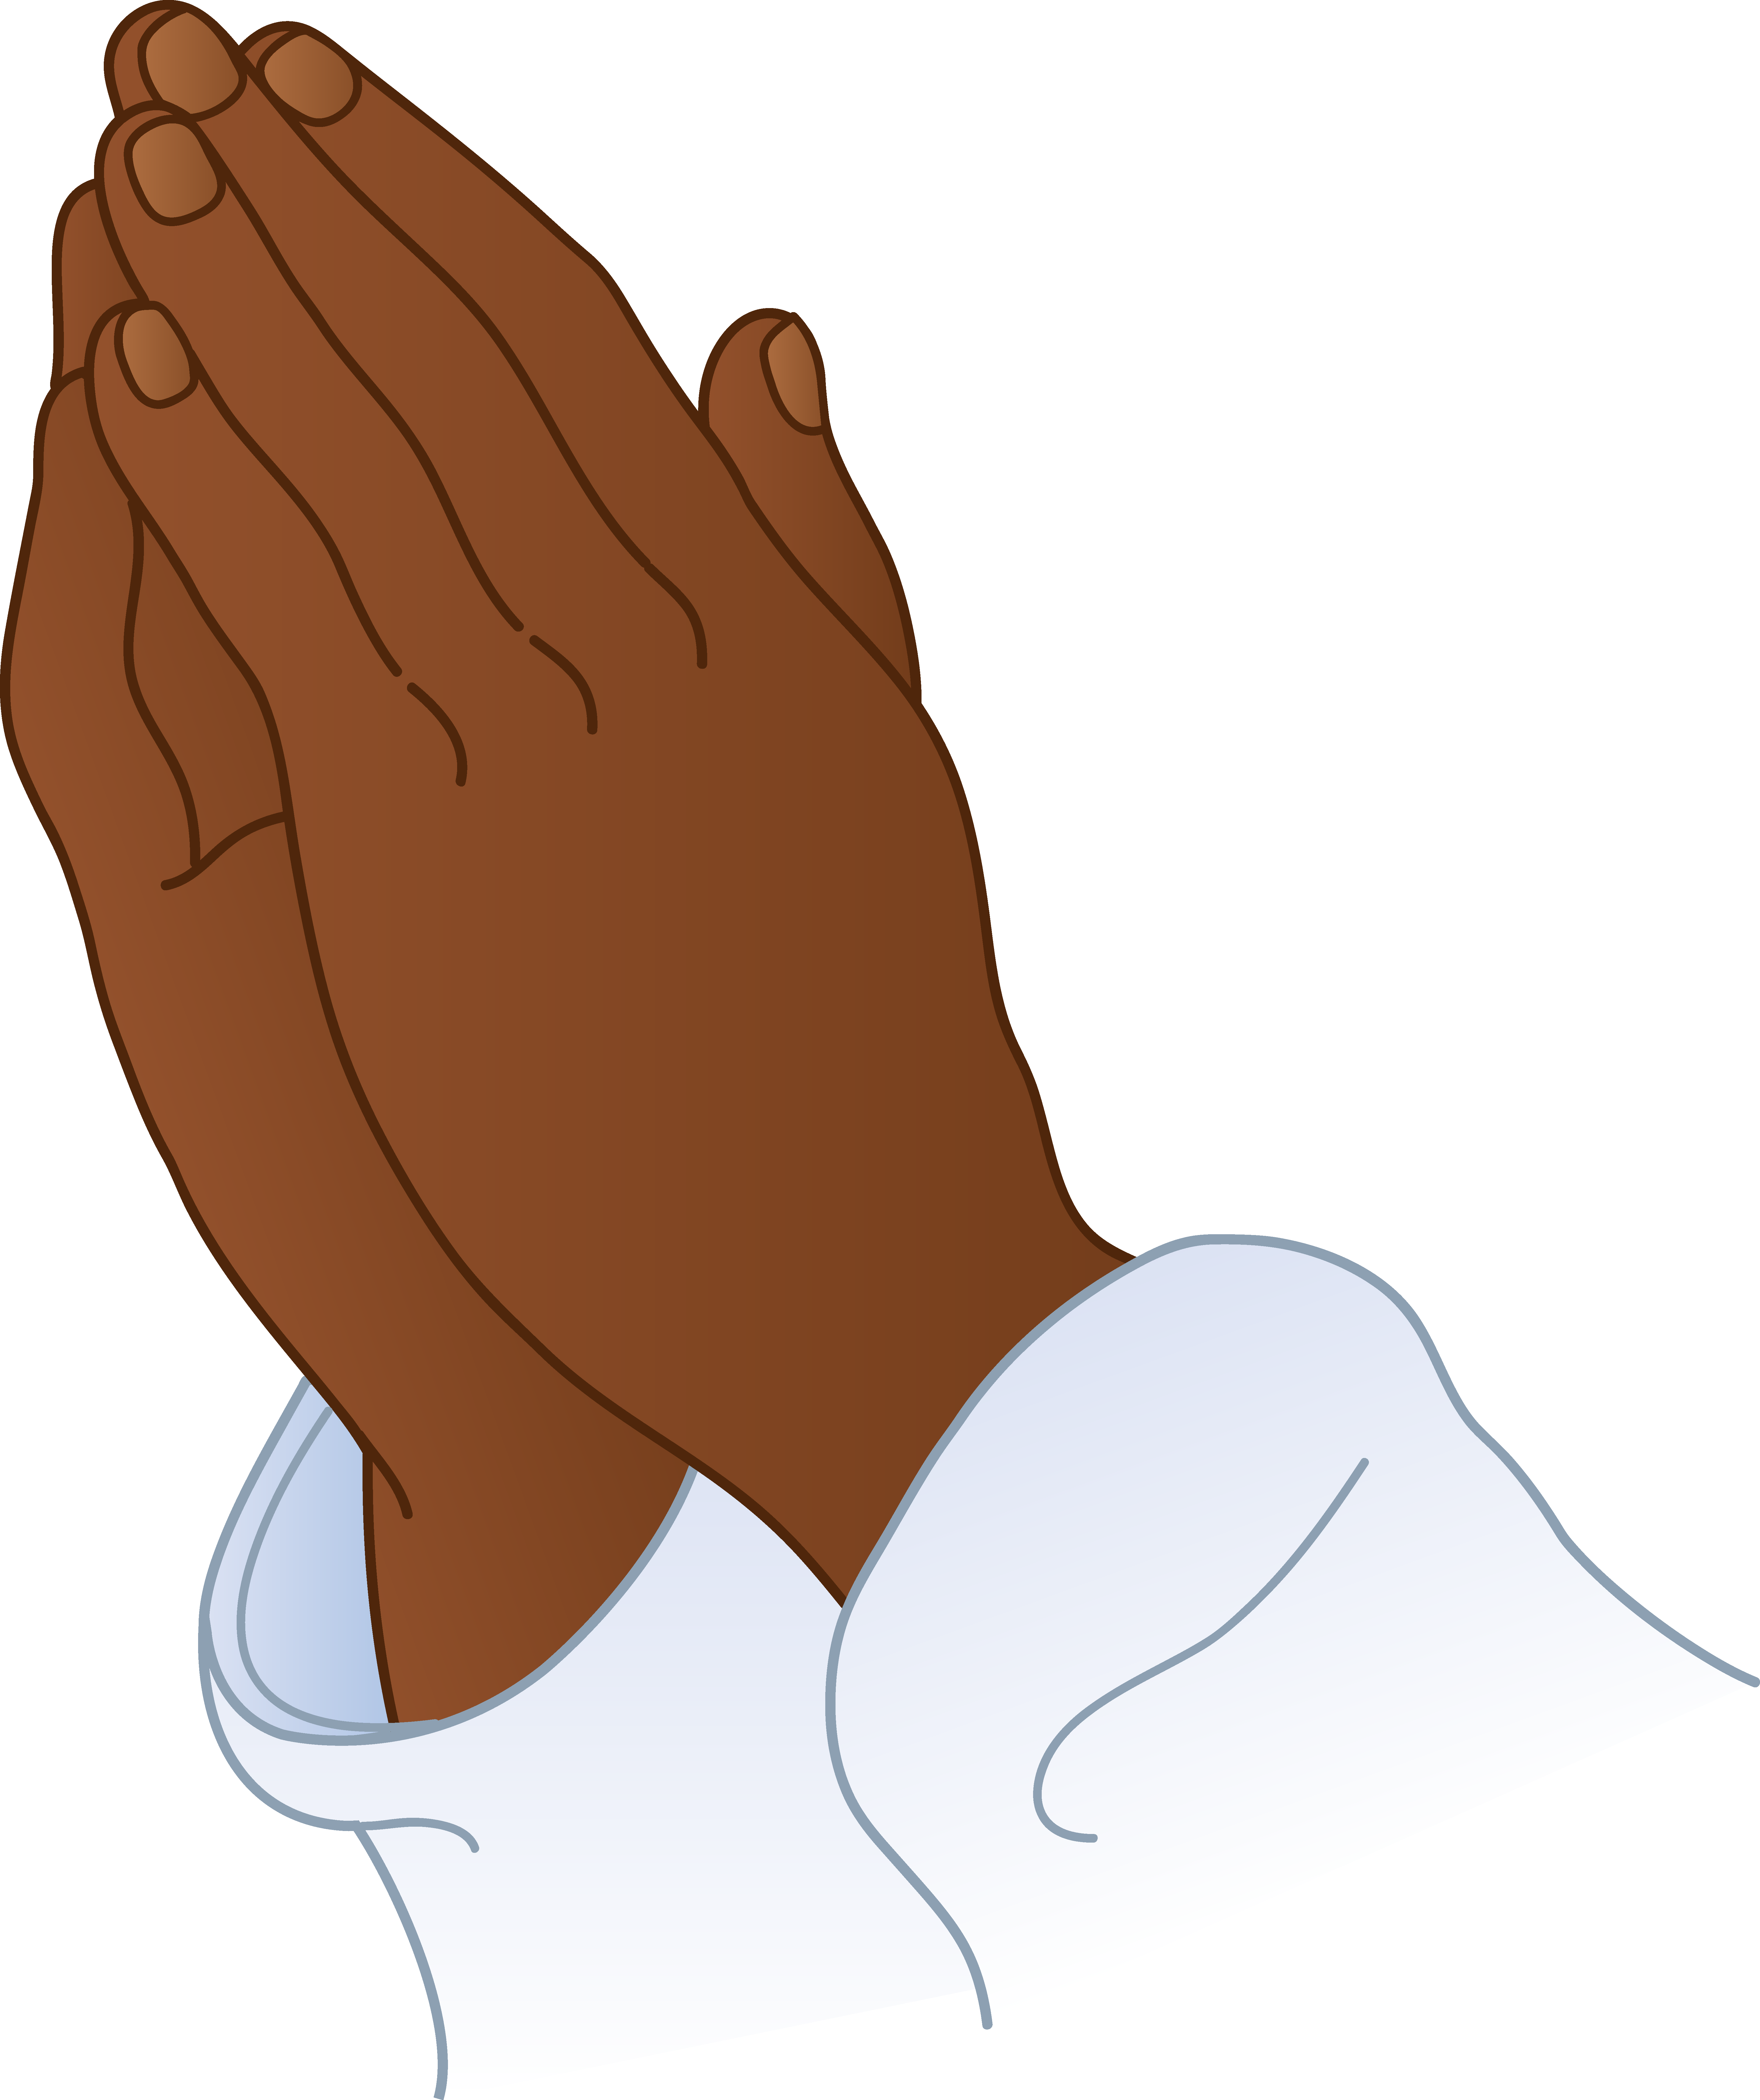 Praying Hands Free Clip Art Cliparts Co